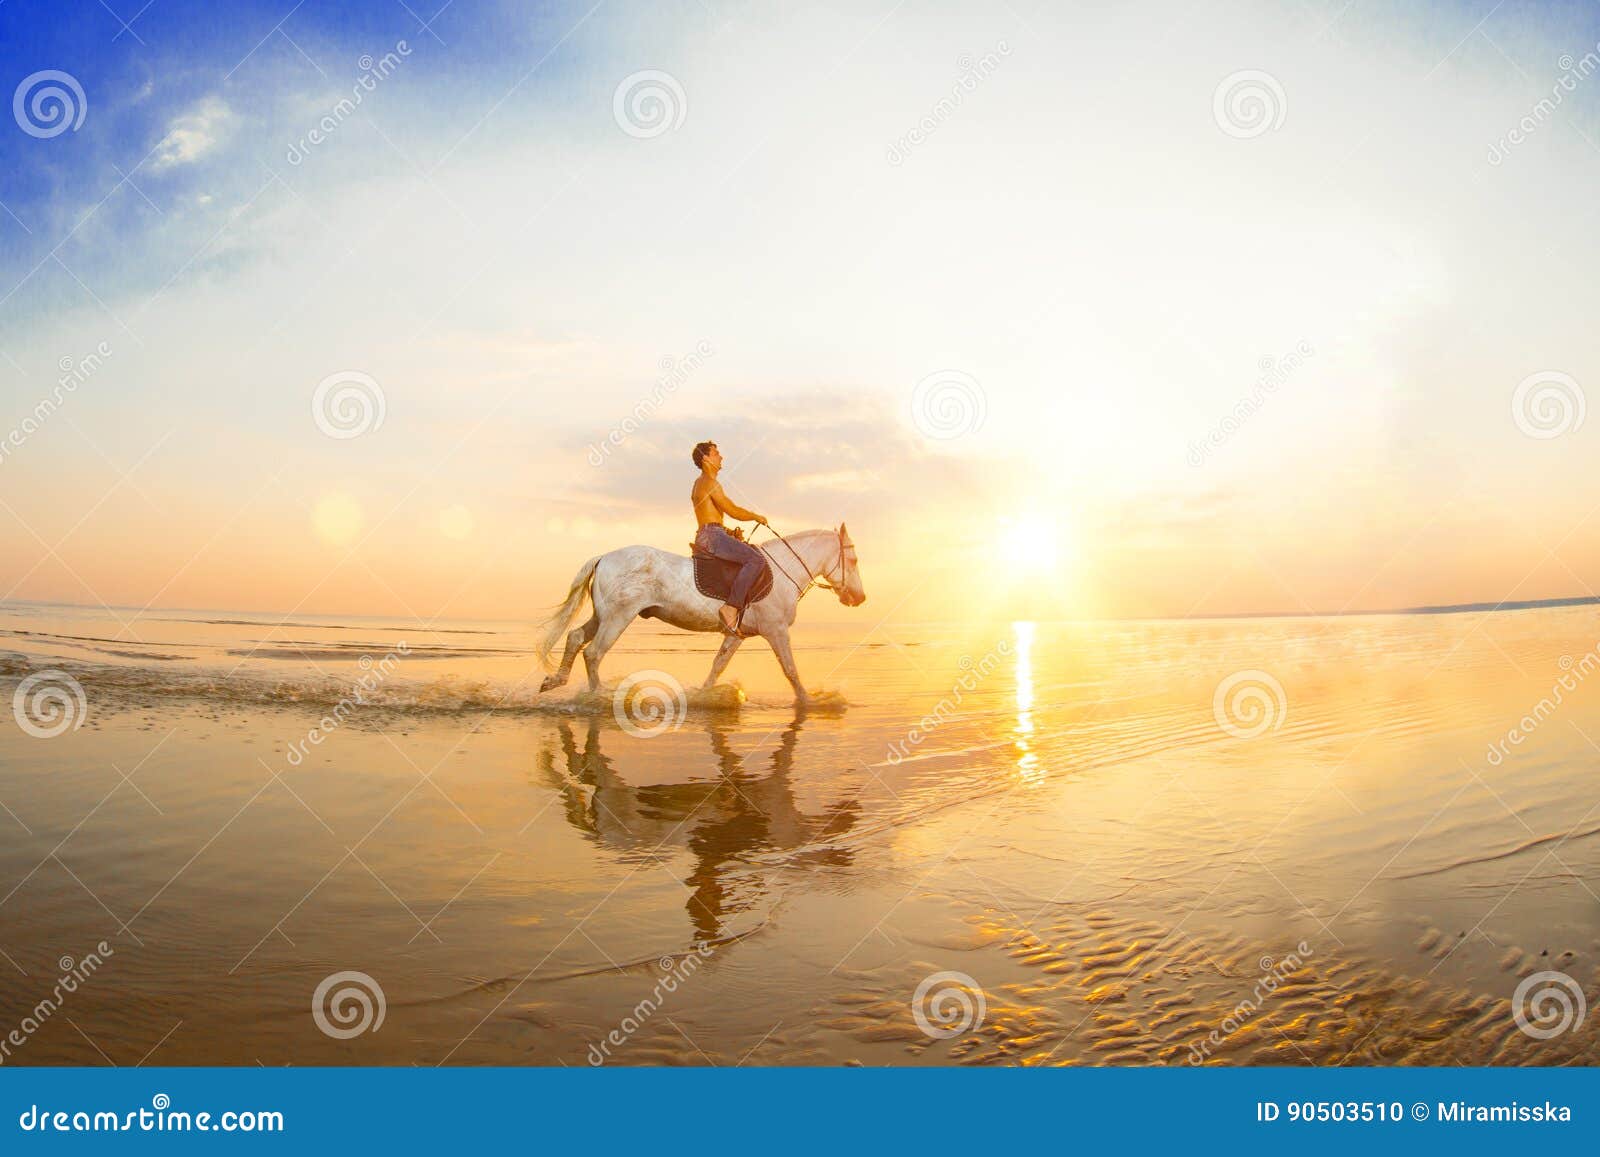 macho man and horse on the background of sky and water. boy mode